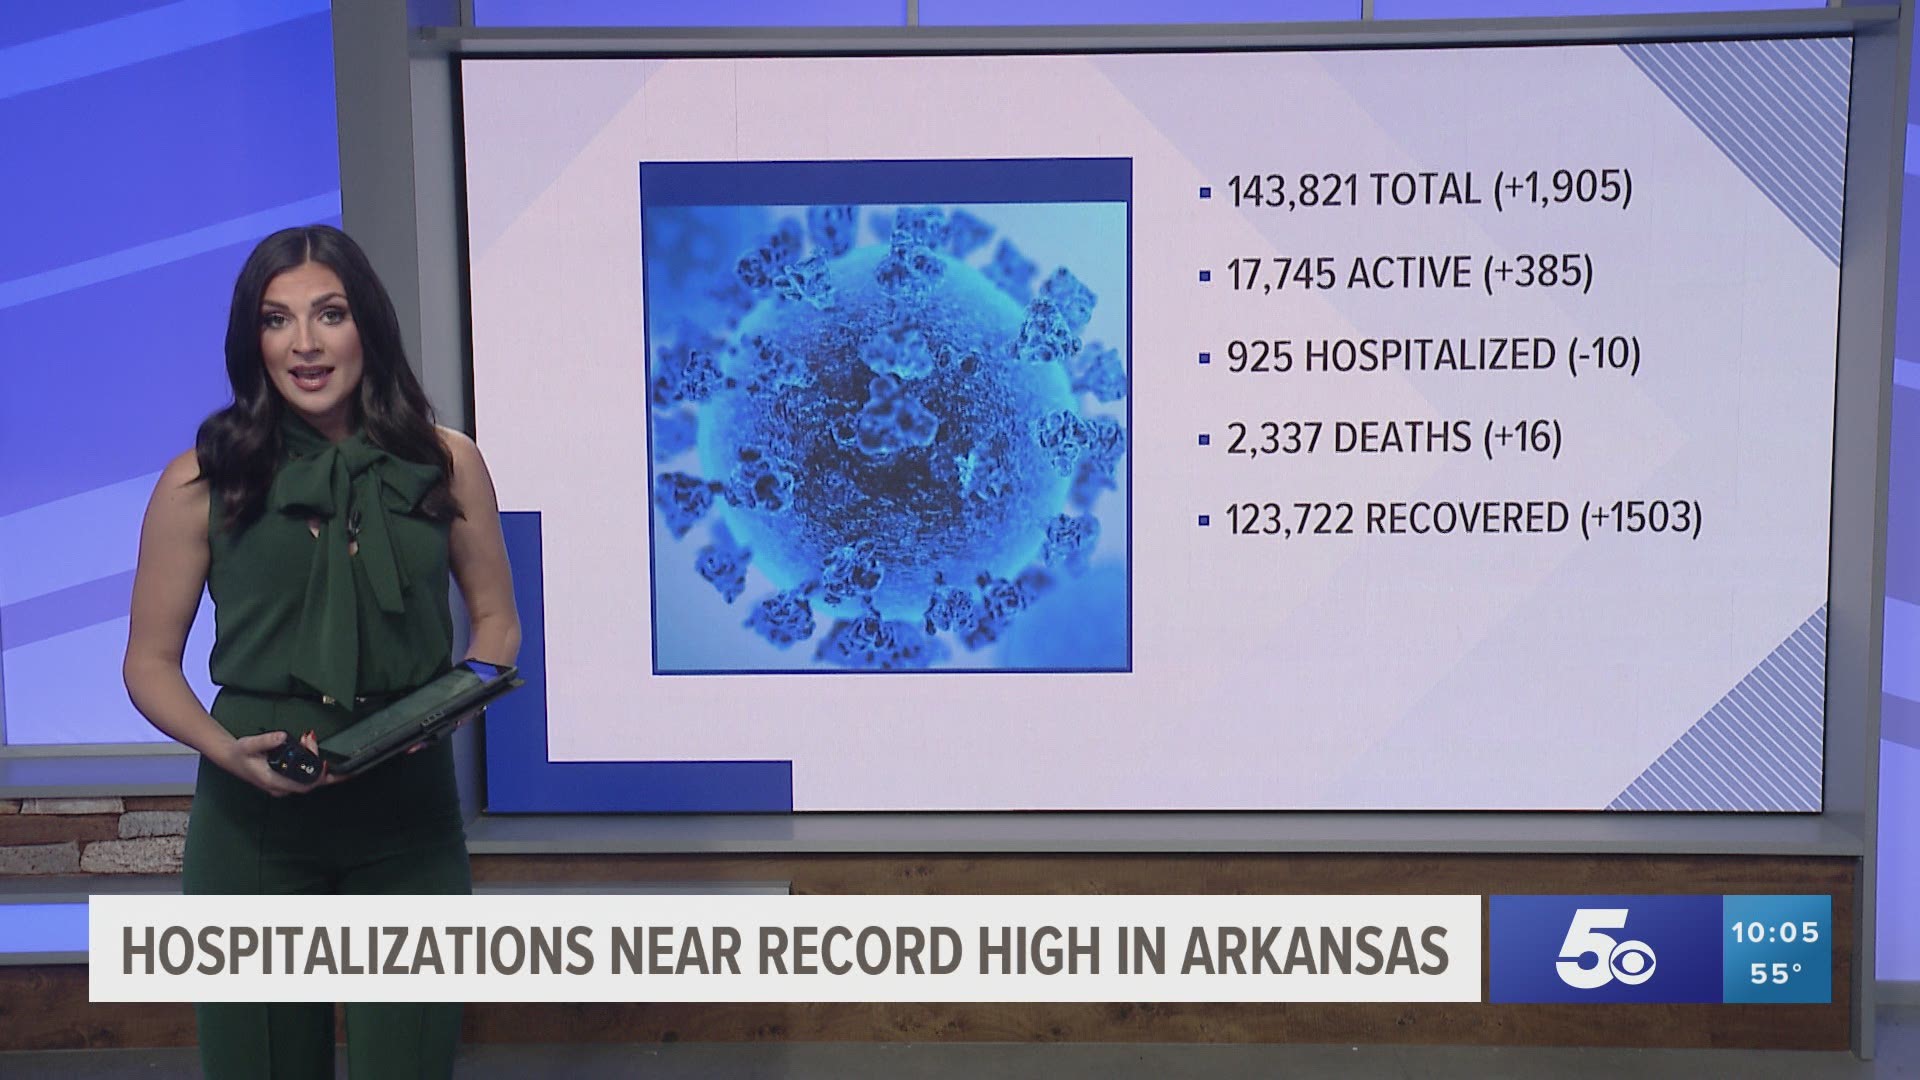 COVID-19 cases in Arkansas continue to rise.